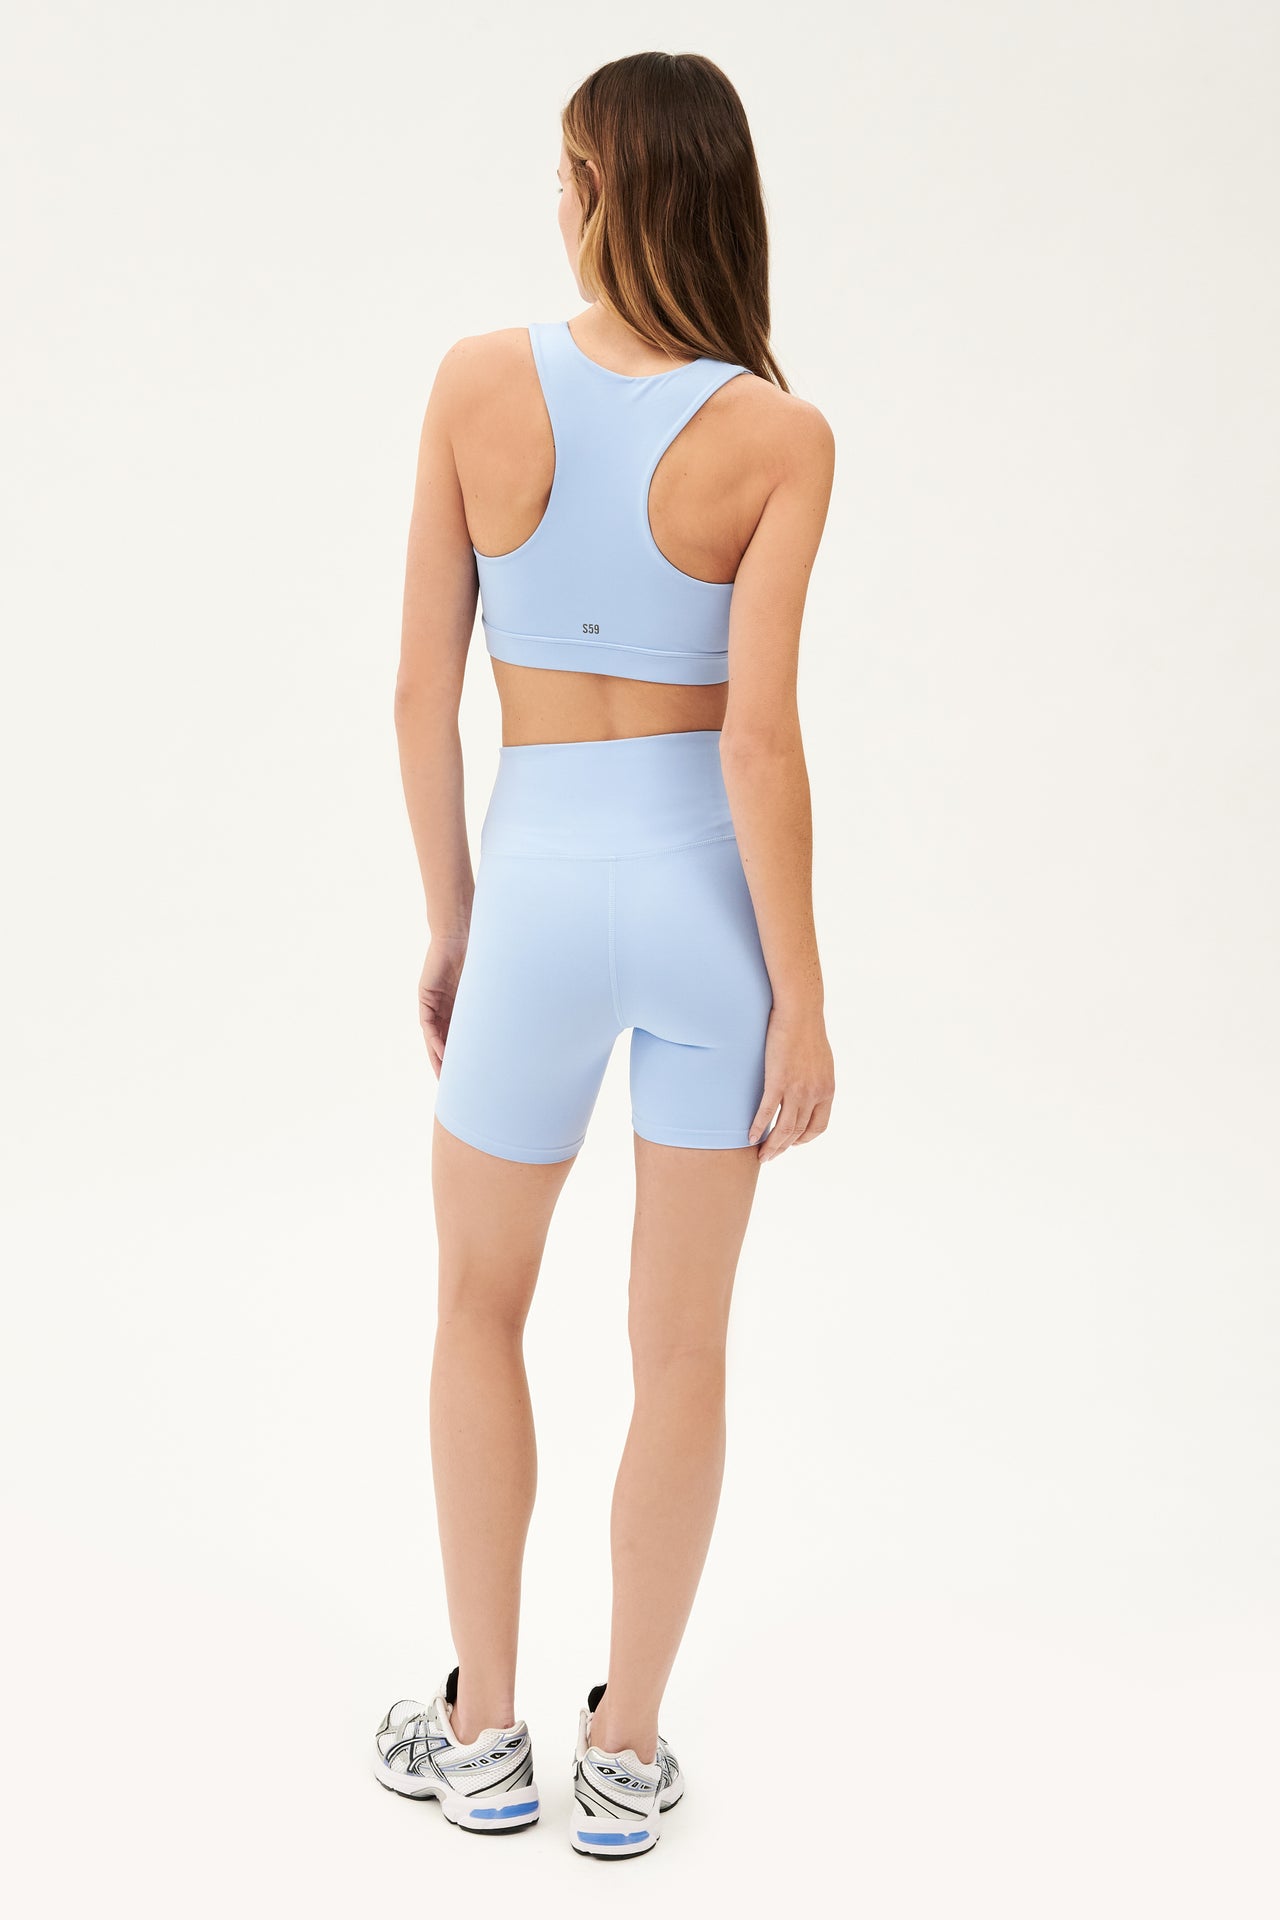 Full back view of woman with dark blonde straight hair wearing pale blue racer strap bra and pale blue high waist bike shorts paired with white shoes with black stripes